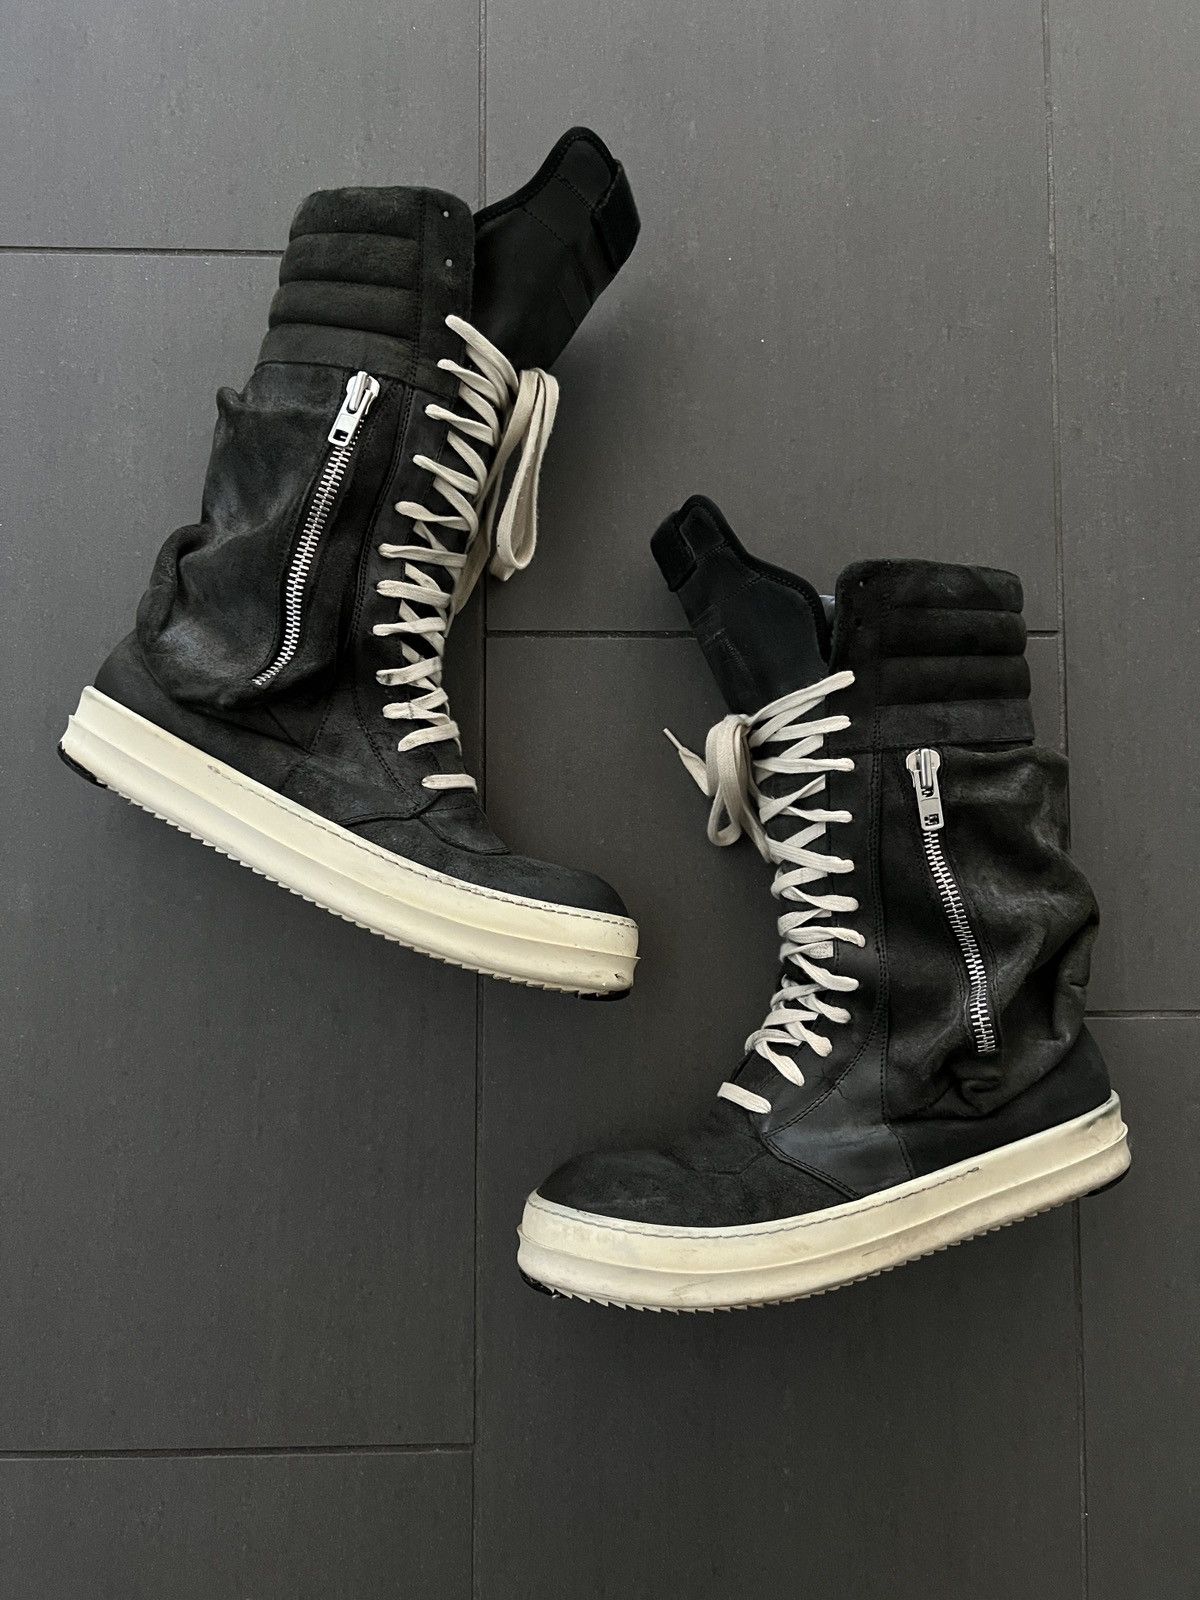 Pre-owned Rick Owens X Rick Owens Drkshdw Rick Owens Blistered Leather Cargobaskets (42) Shoes In Black